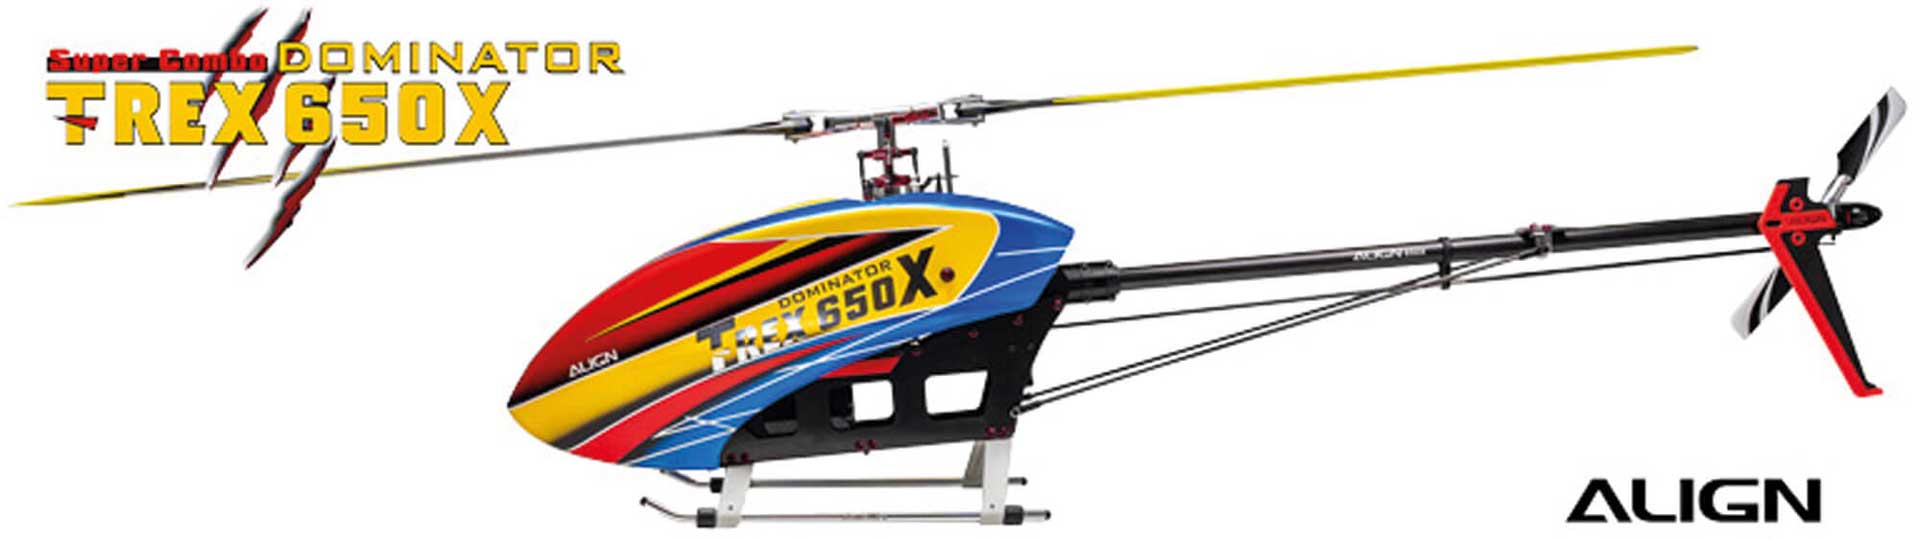 ALIGN T-REX 650X Dominator Combo (6S) RC Helicopter